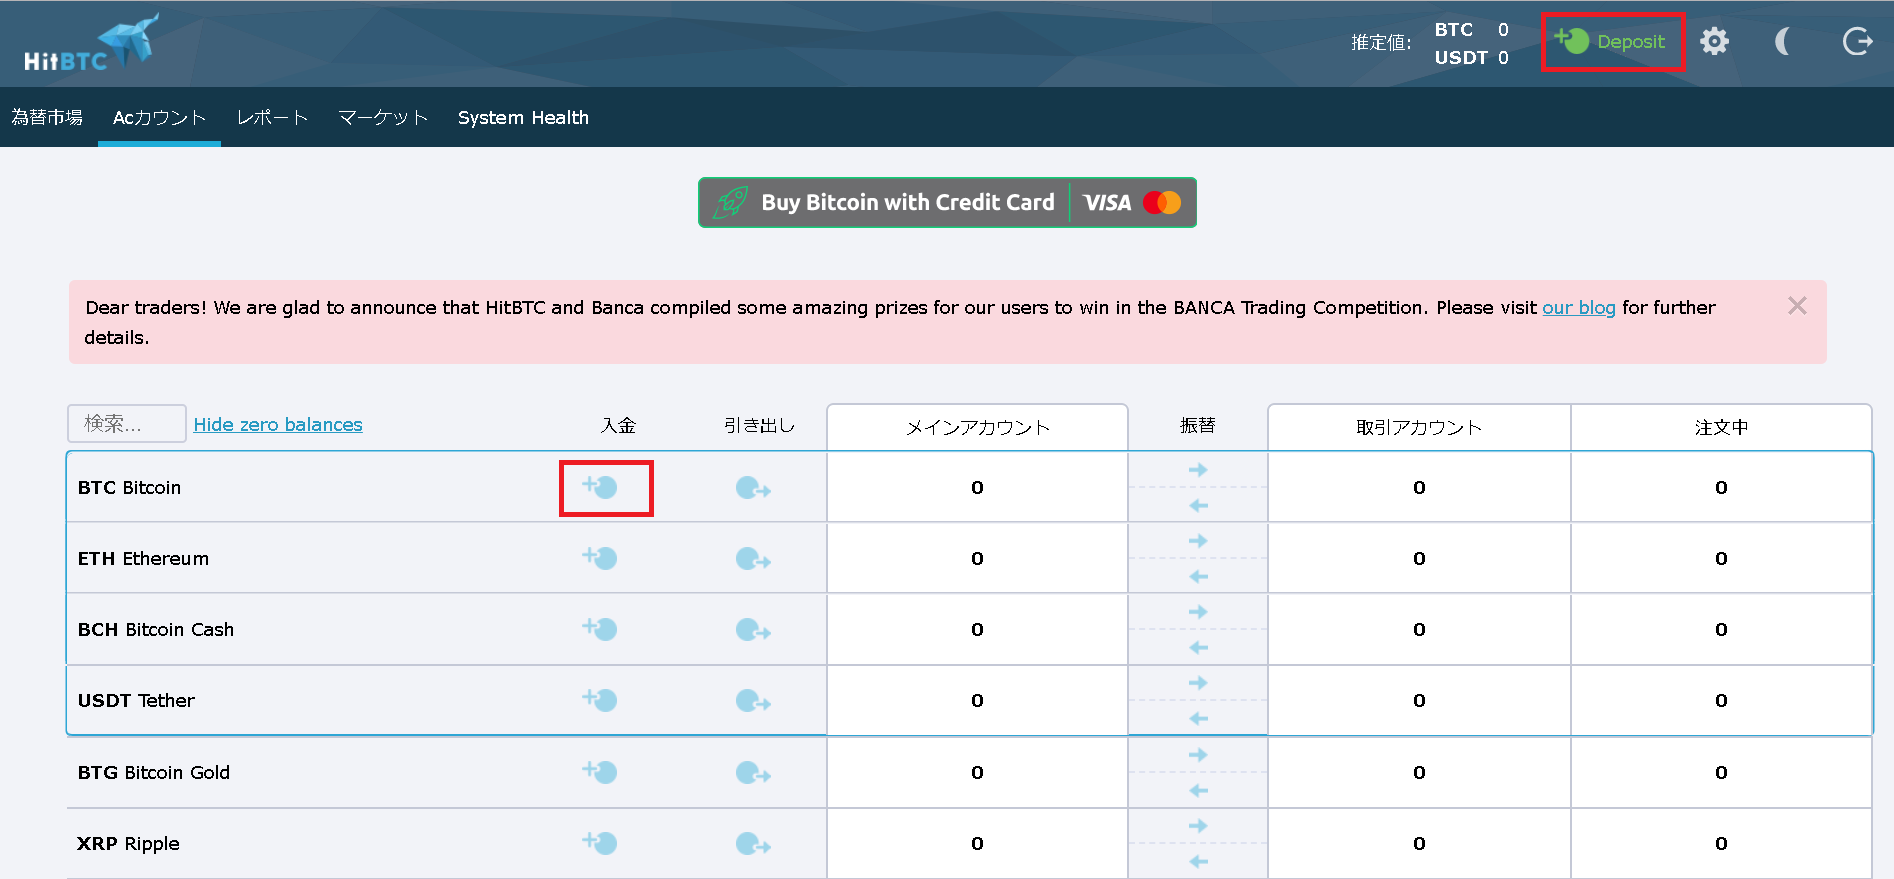 How do i get my bch into bittrex up after adding to hitbtc